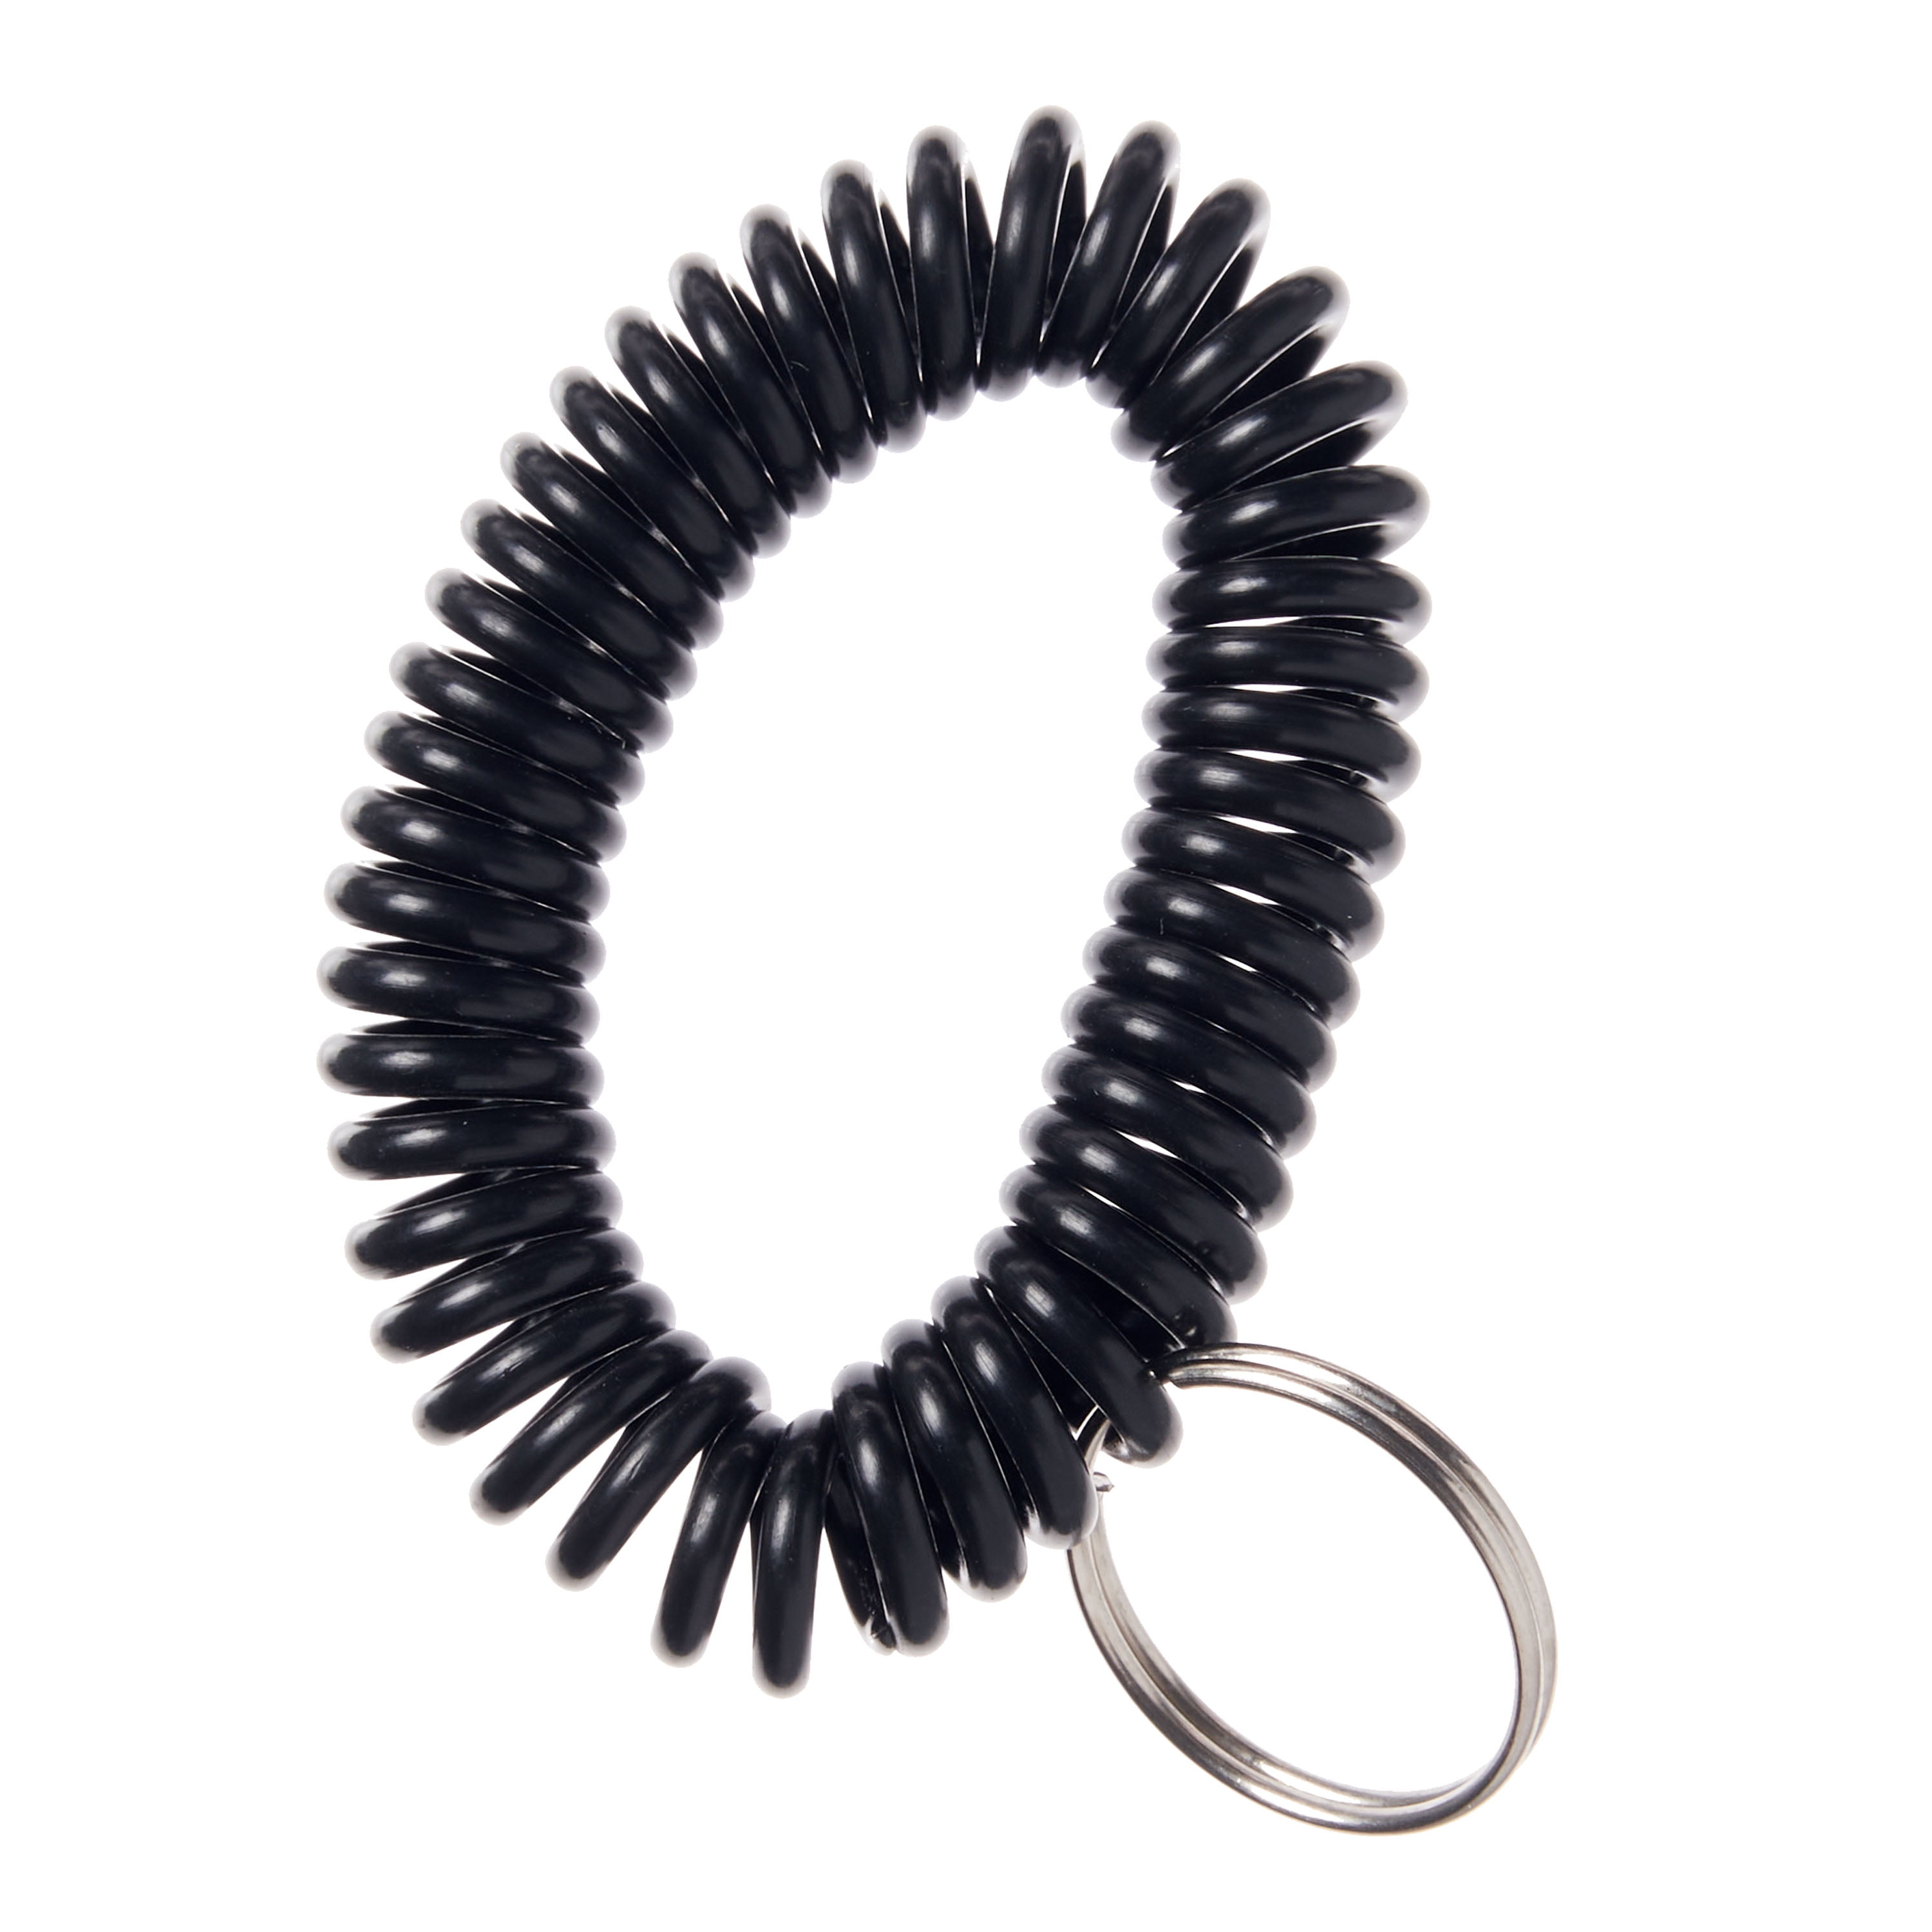 QEEQPF 6 Pieces of Stretchy Spiral Keyring, with 2 Pieces of